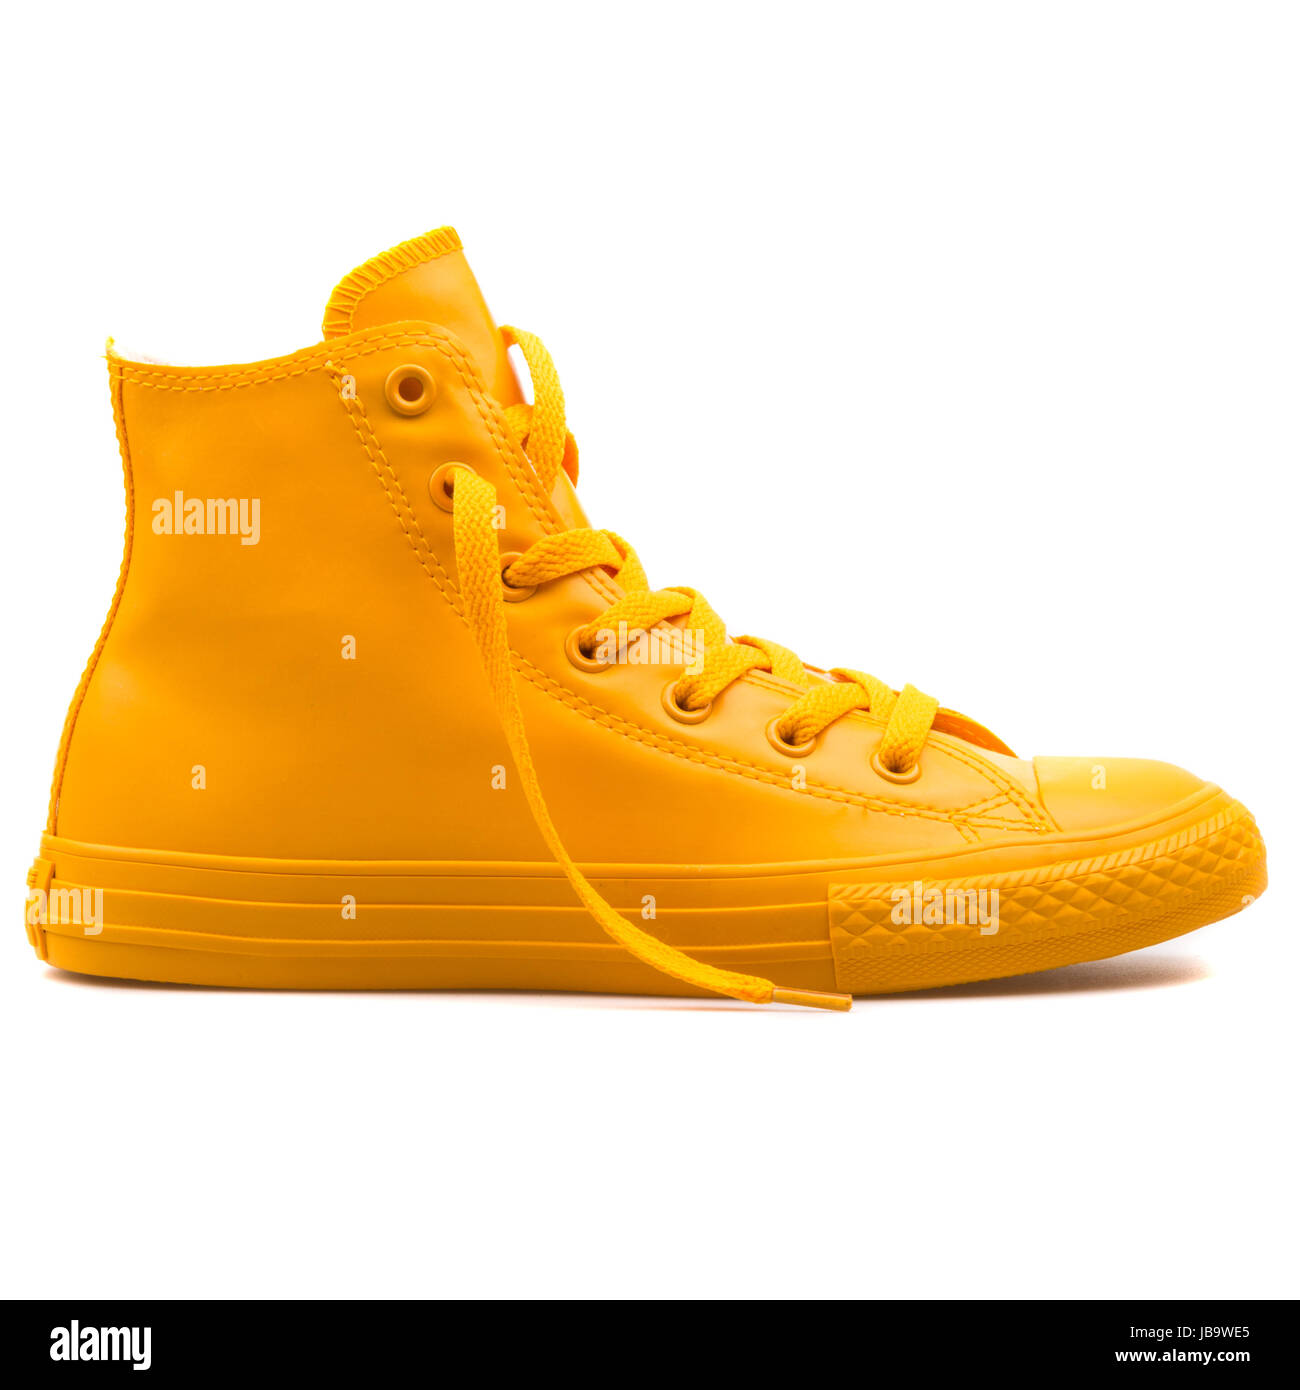 all yellow converse